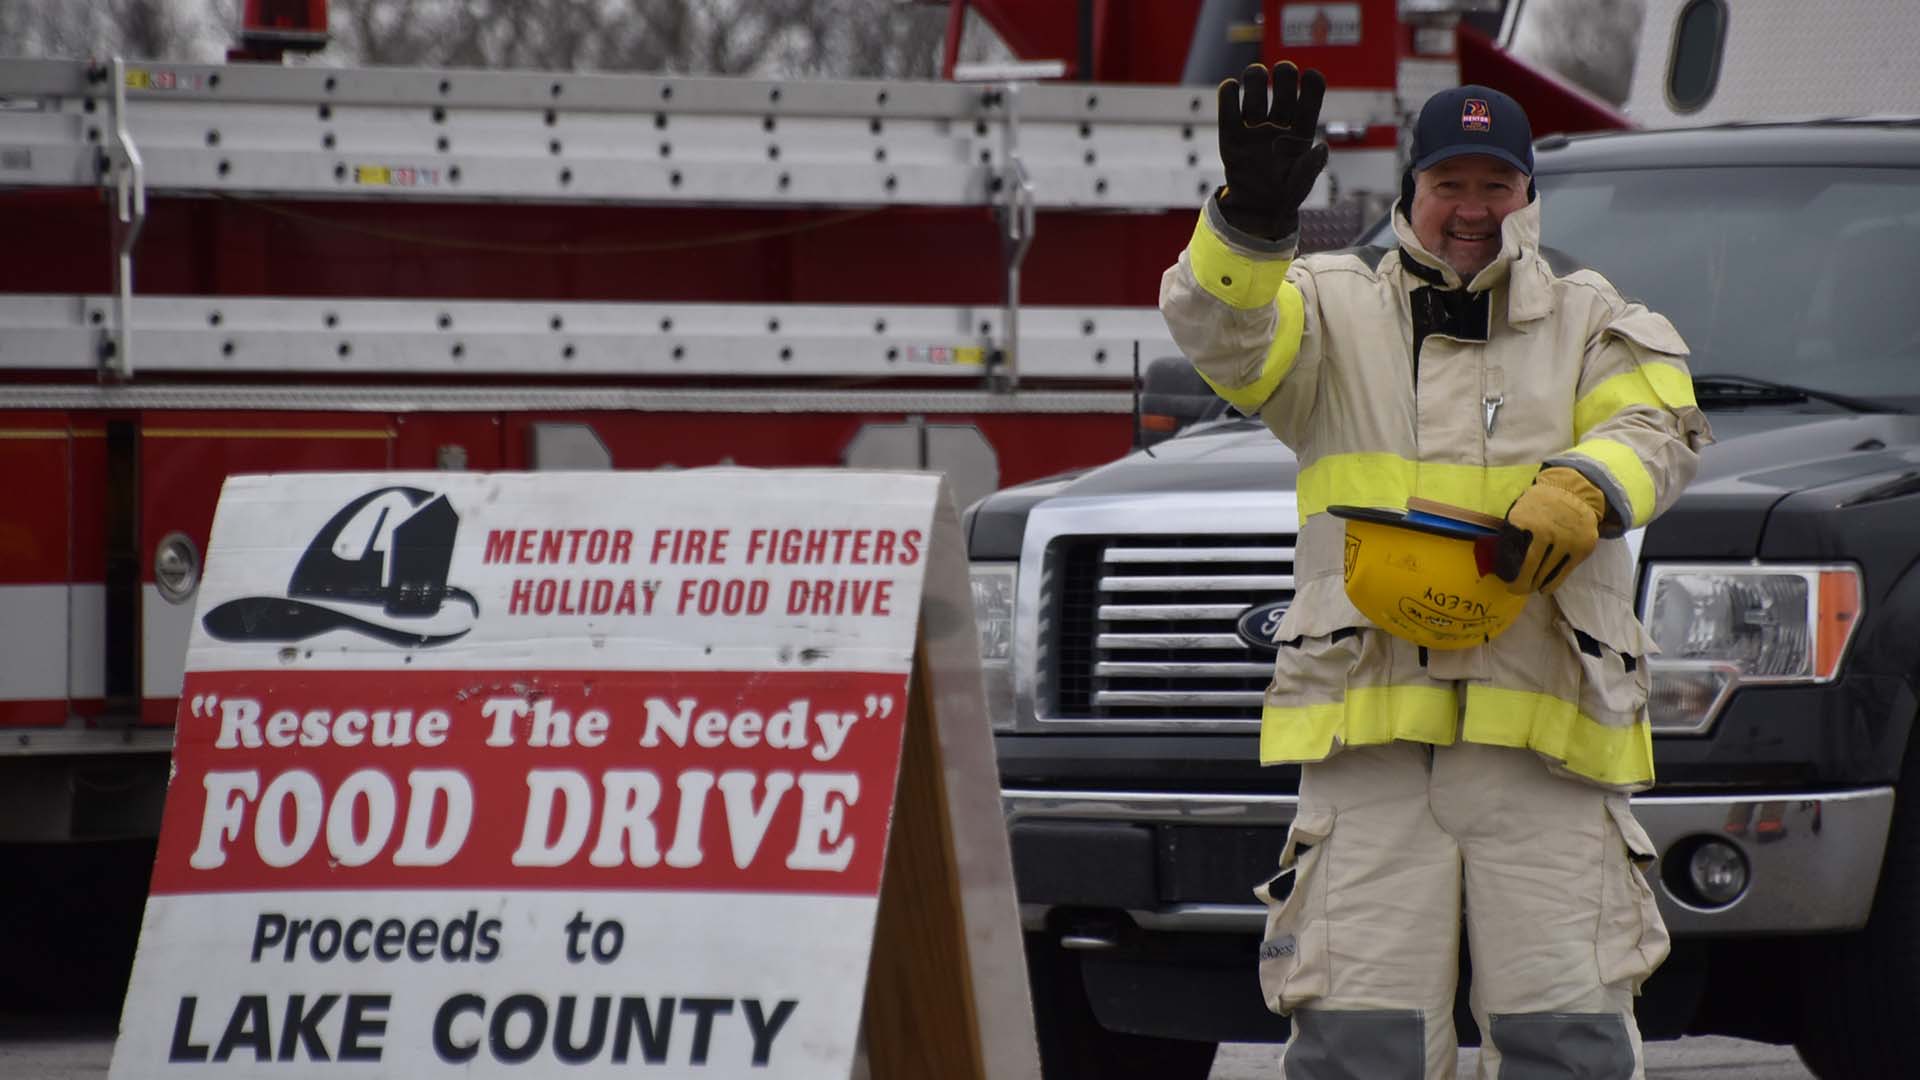 Image of volunteer collecting donations at Mentor Fire Rescue the Needy Food Drive.